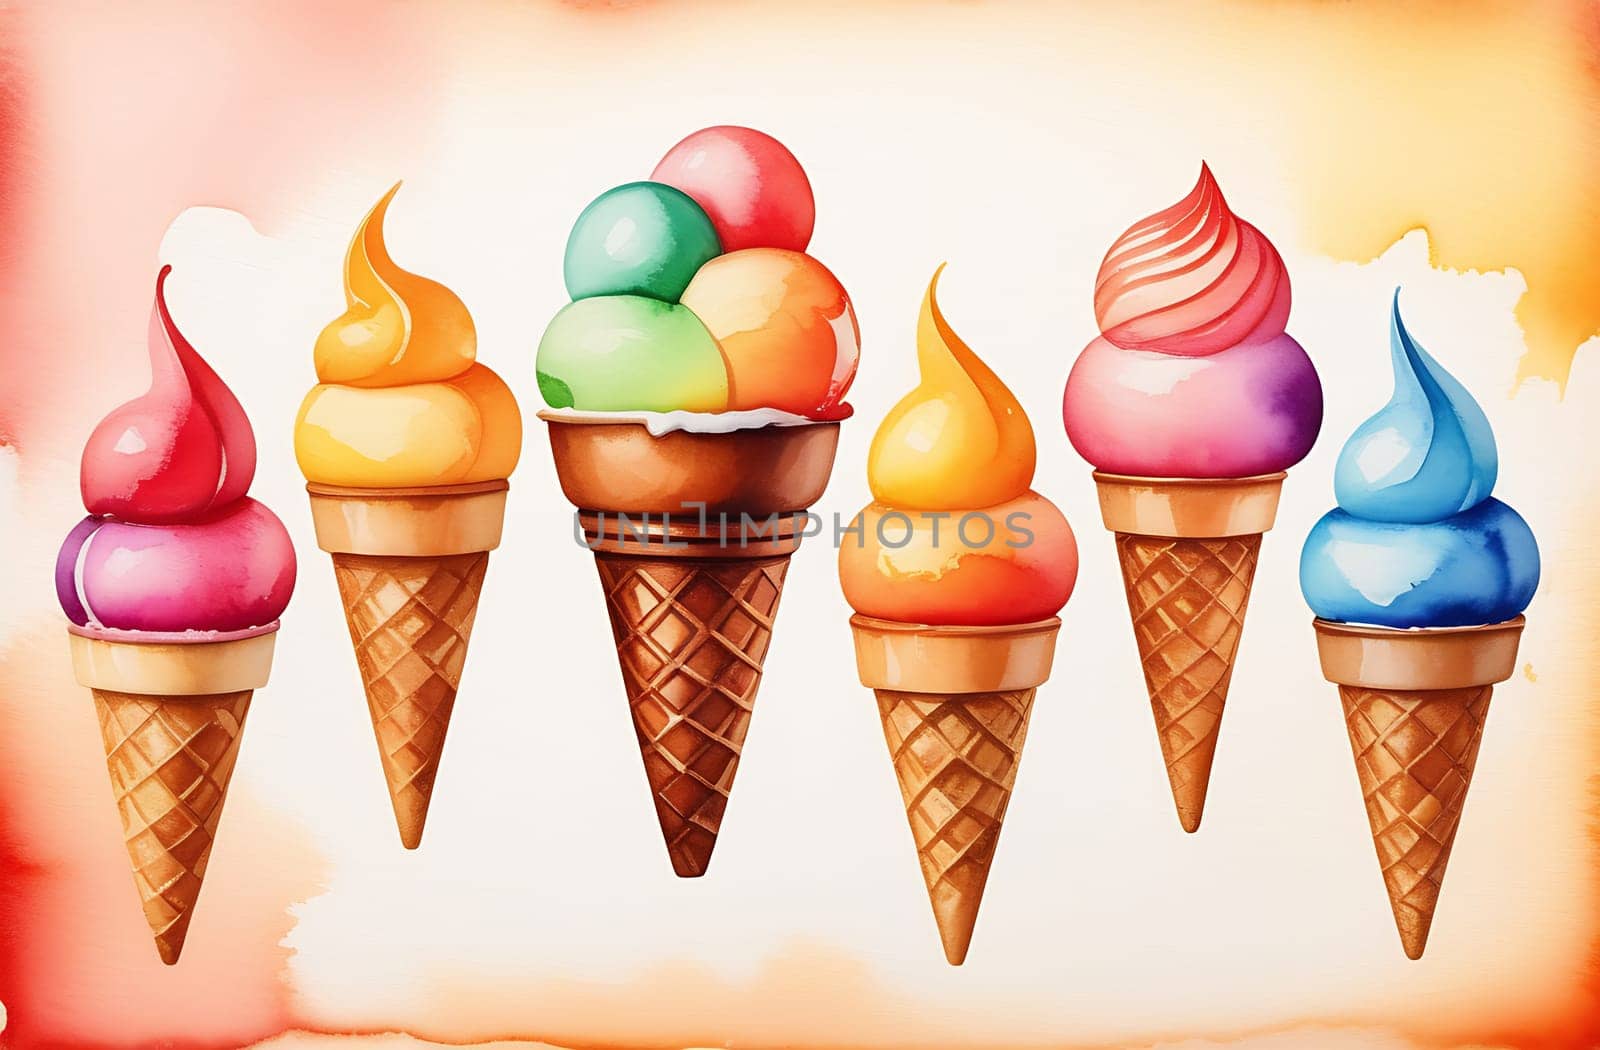 A set of watercolor waffle cones on a multicolored background.